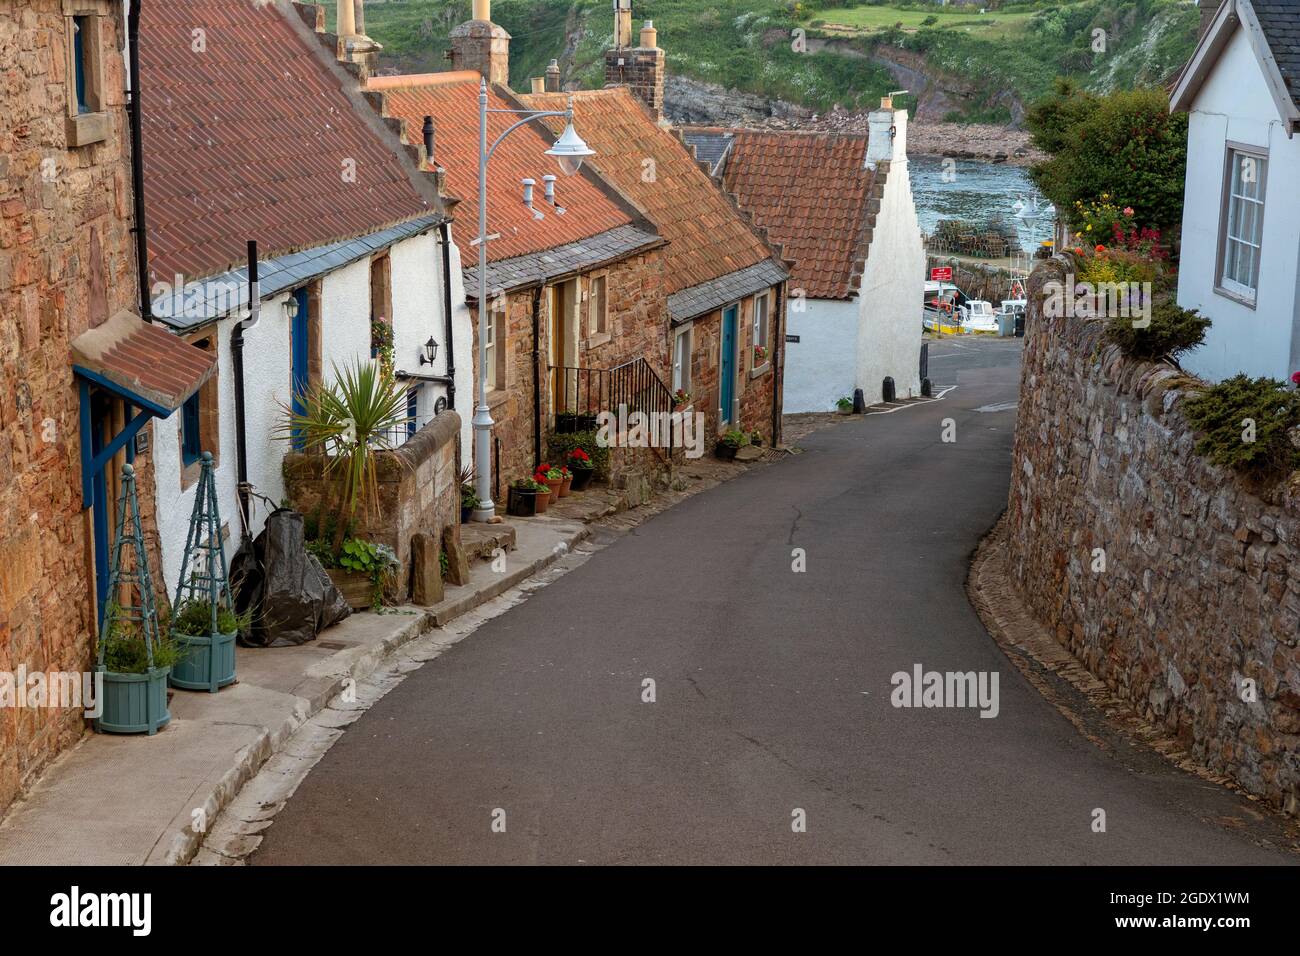 Street in the village of Crail, Scotland Stock Photo